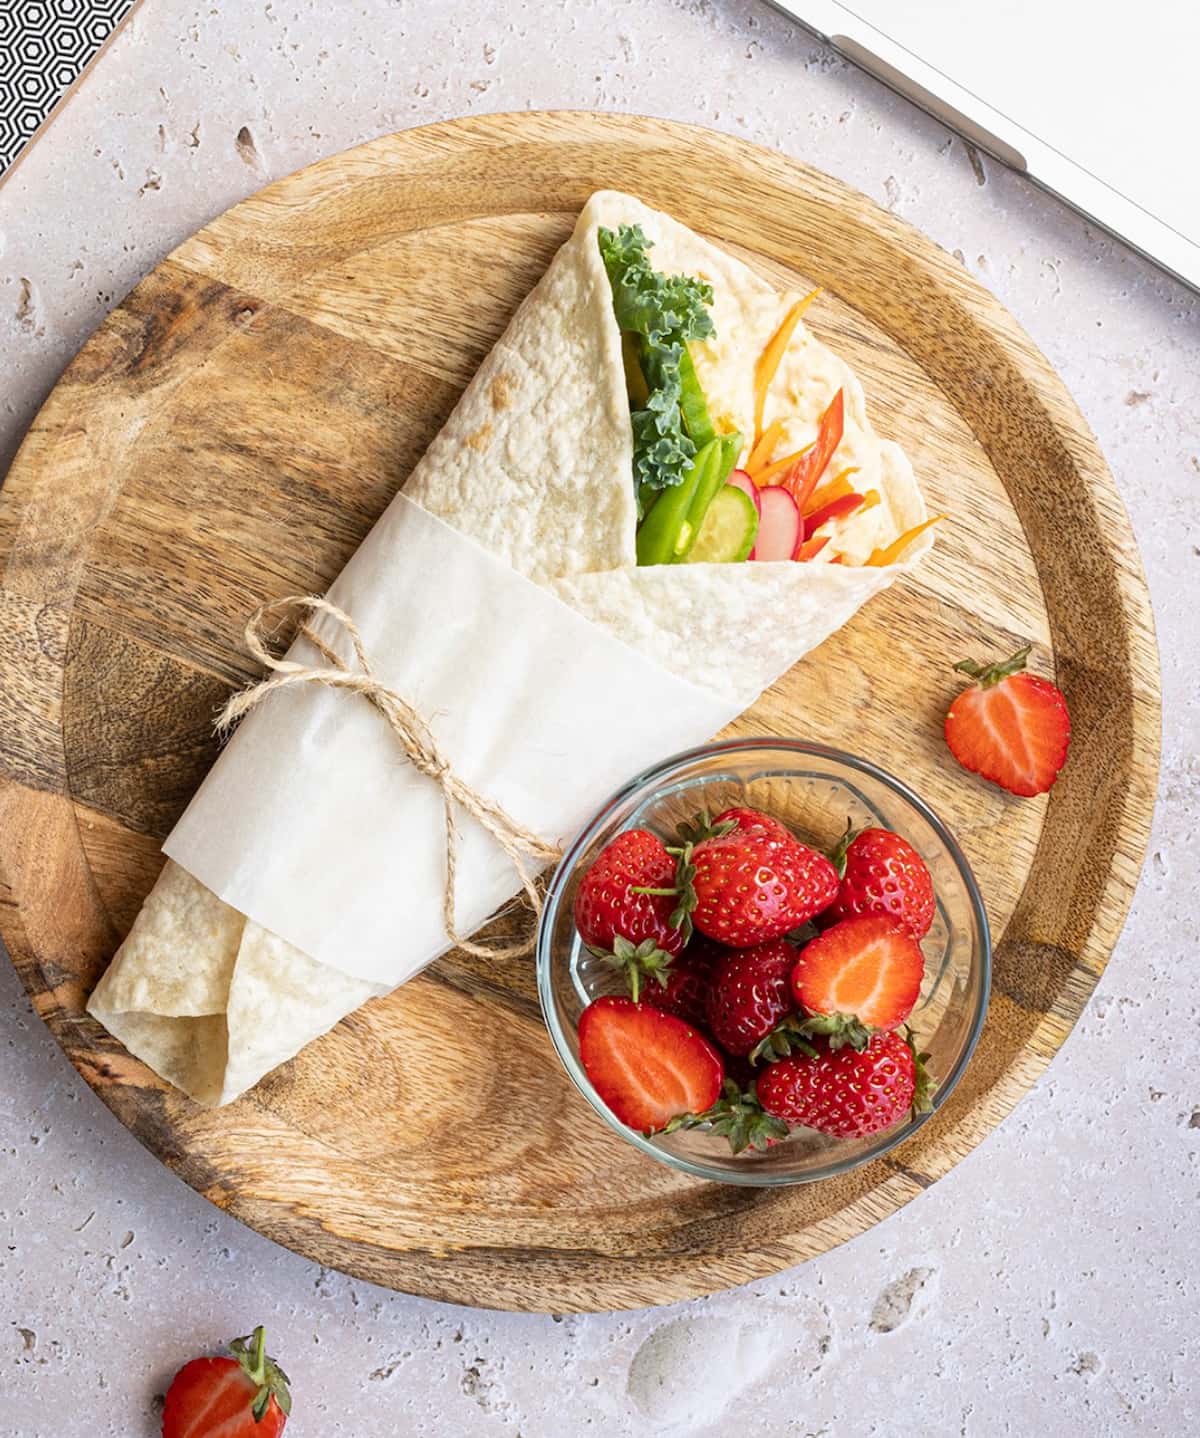 A veggie wrap on a wooden tray made with Rudi's tortilla.